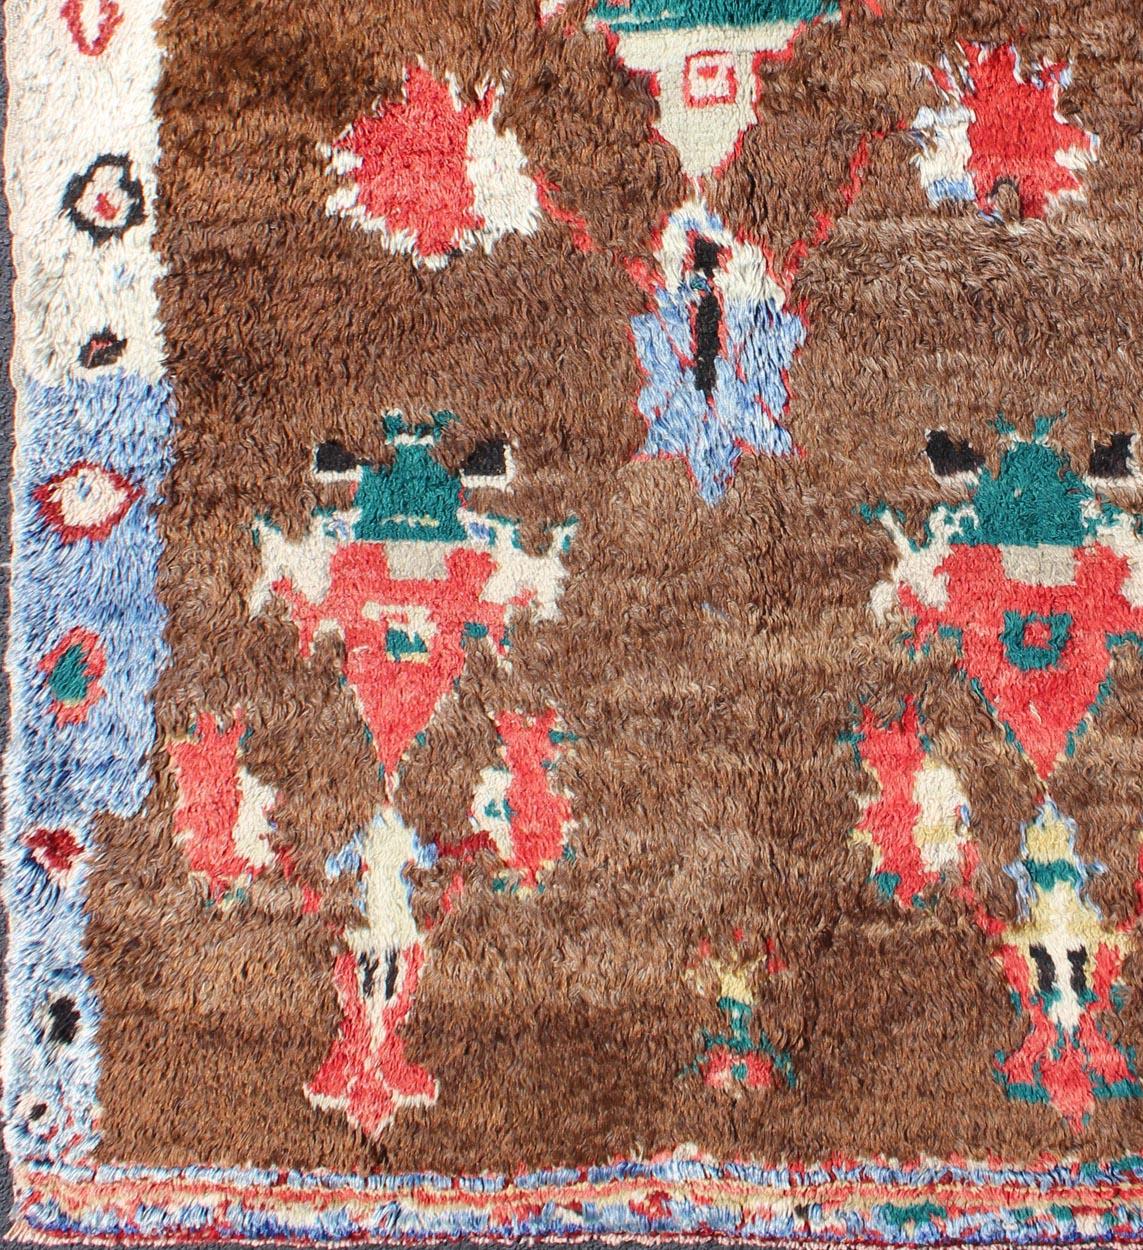 Colorful Antique Tulu Rug with Angora Wool Blend and Modern Tribal Design
This antique Tulu rug showcases a free-spirited design with stunning colors of blue, brown, green, red and cream. The high pile of this rare rug is angora wool, which adds